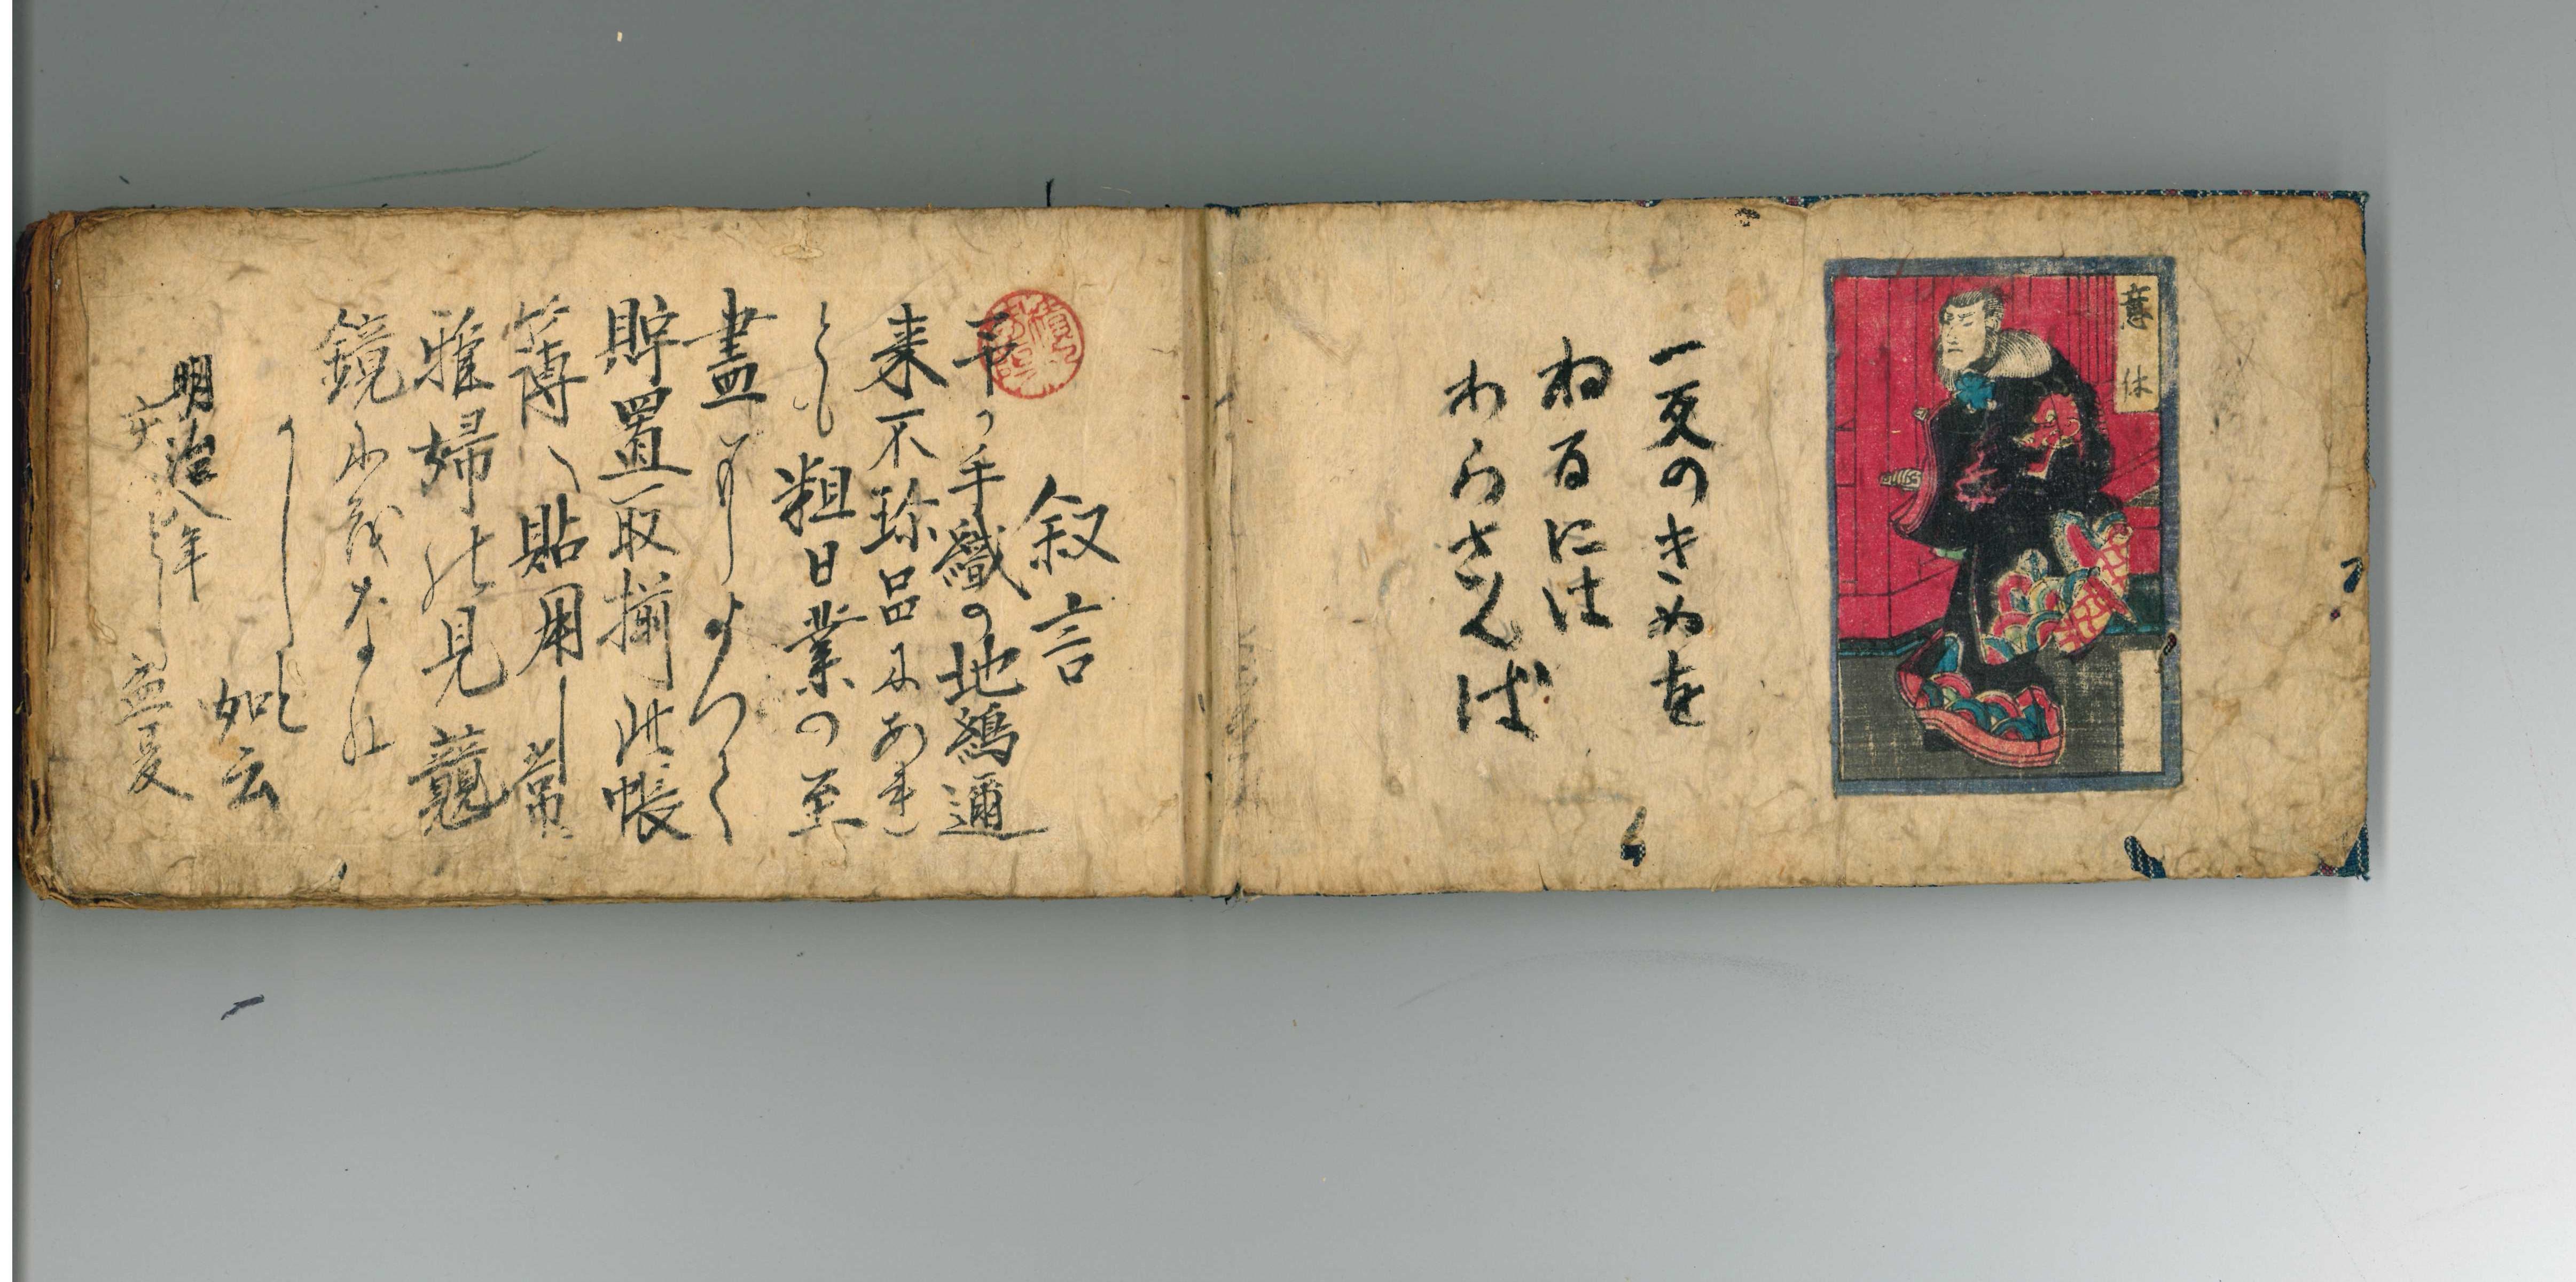 This is a rare example of a Shima Cho, which is a Kimono textile, fabric swatch book dating from the late 19th century (1876). They were made either as a commercial sample book or as a record of a families own designs and weaves. This book contains